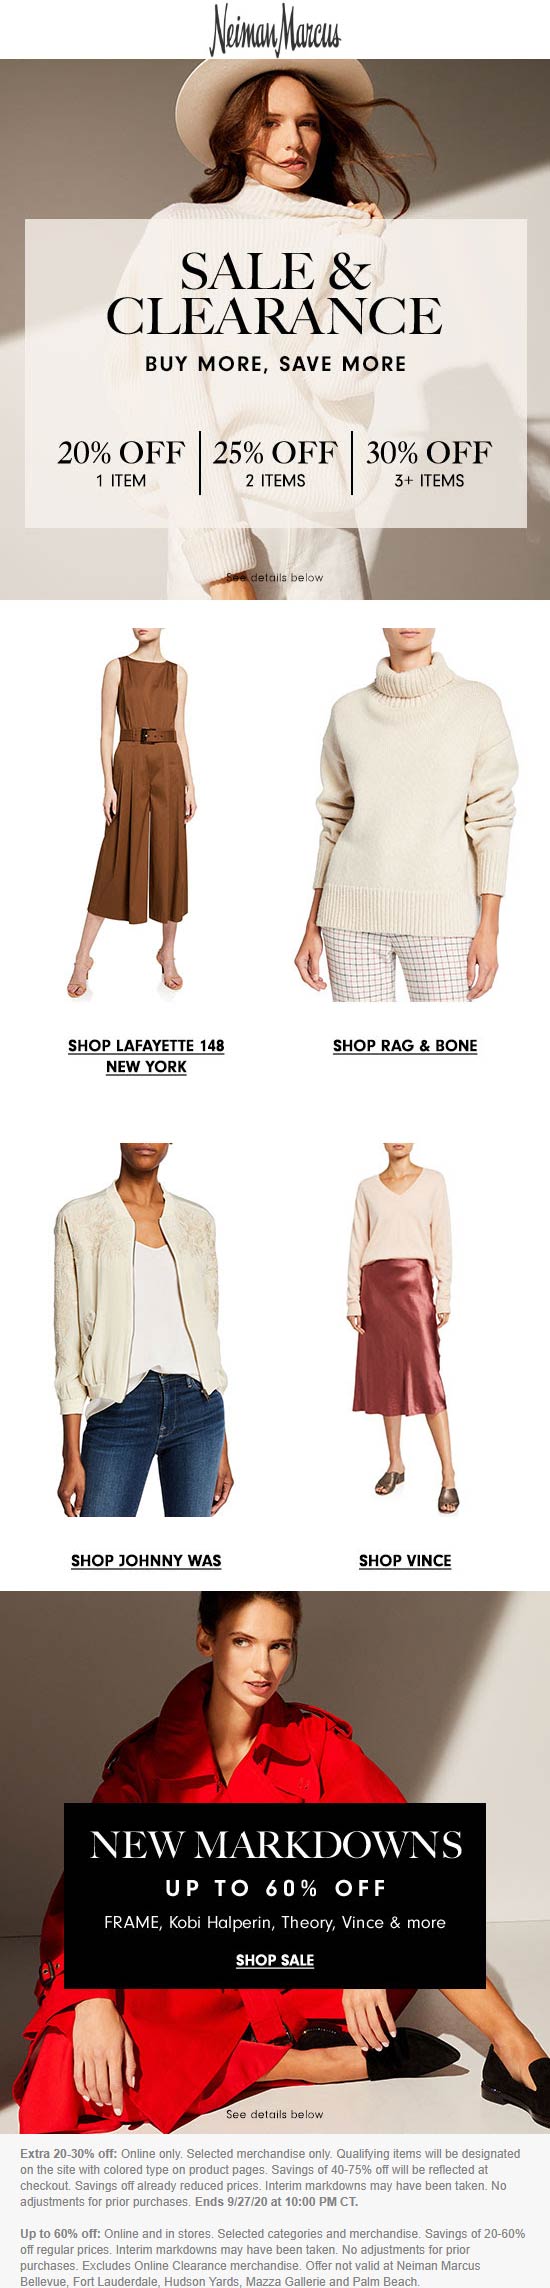 Neiman Marcus stores Coupon  Extra 20-30% off sale & clearance online at Neiman Marcus #neimanmarcus 